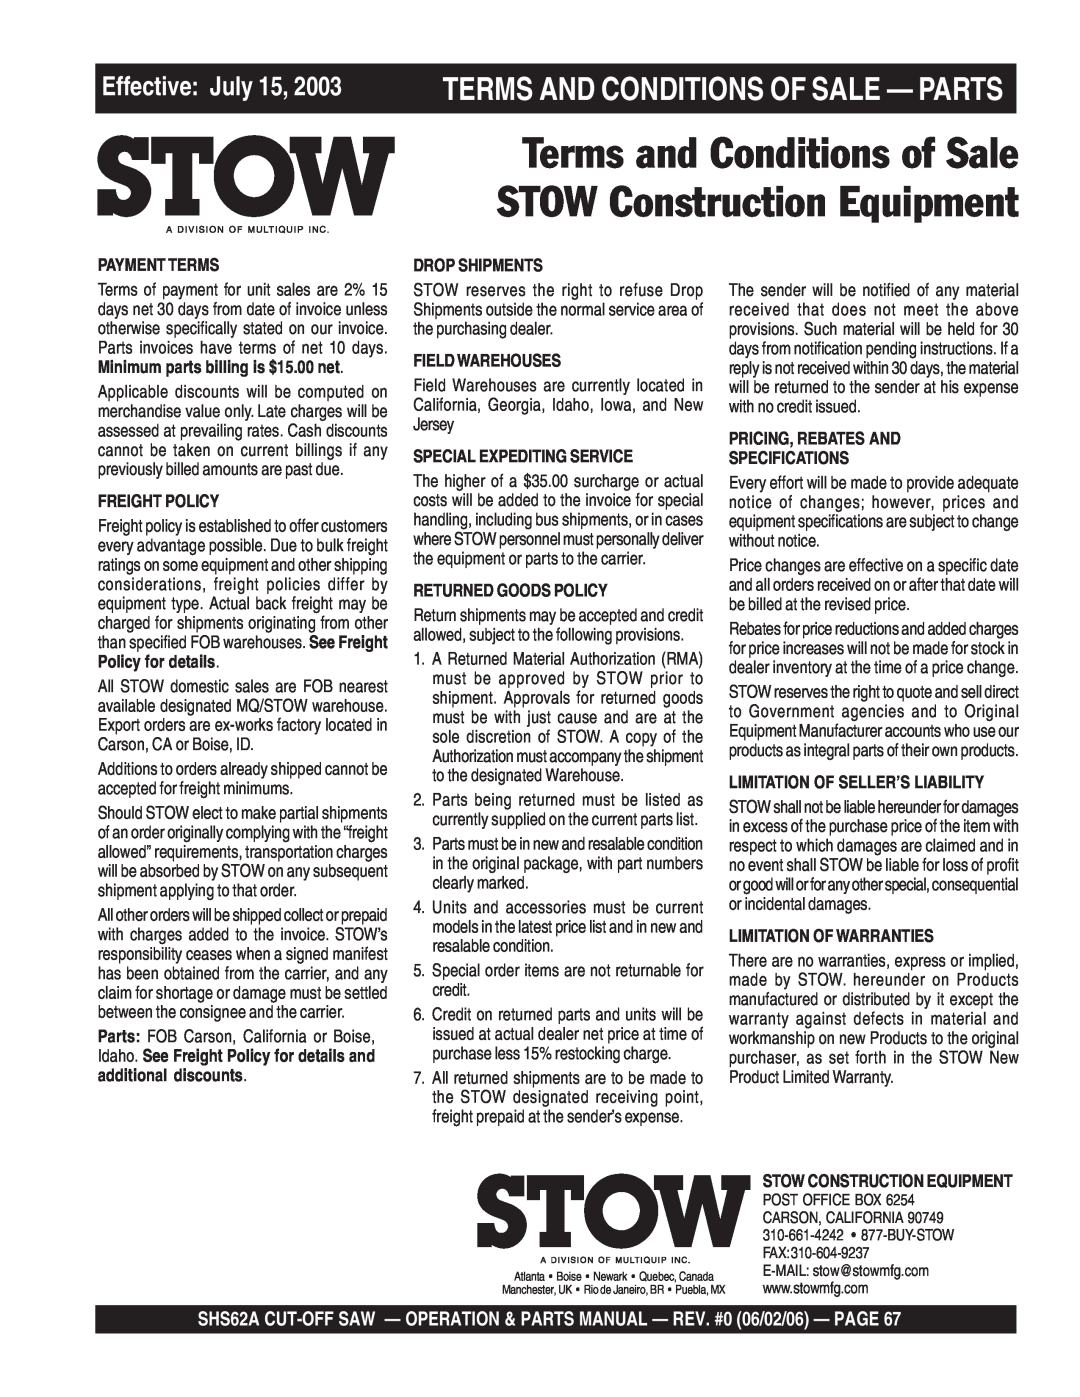 Stow SHS62A Terms and Conditions of Sale, STOW Construction Equipment, Terms And Conditions Of Sale - Parts, Payment Terms 